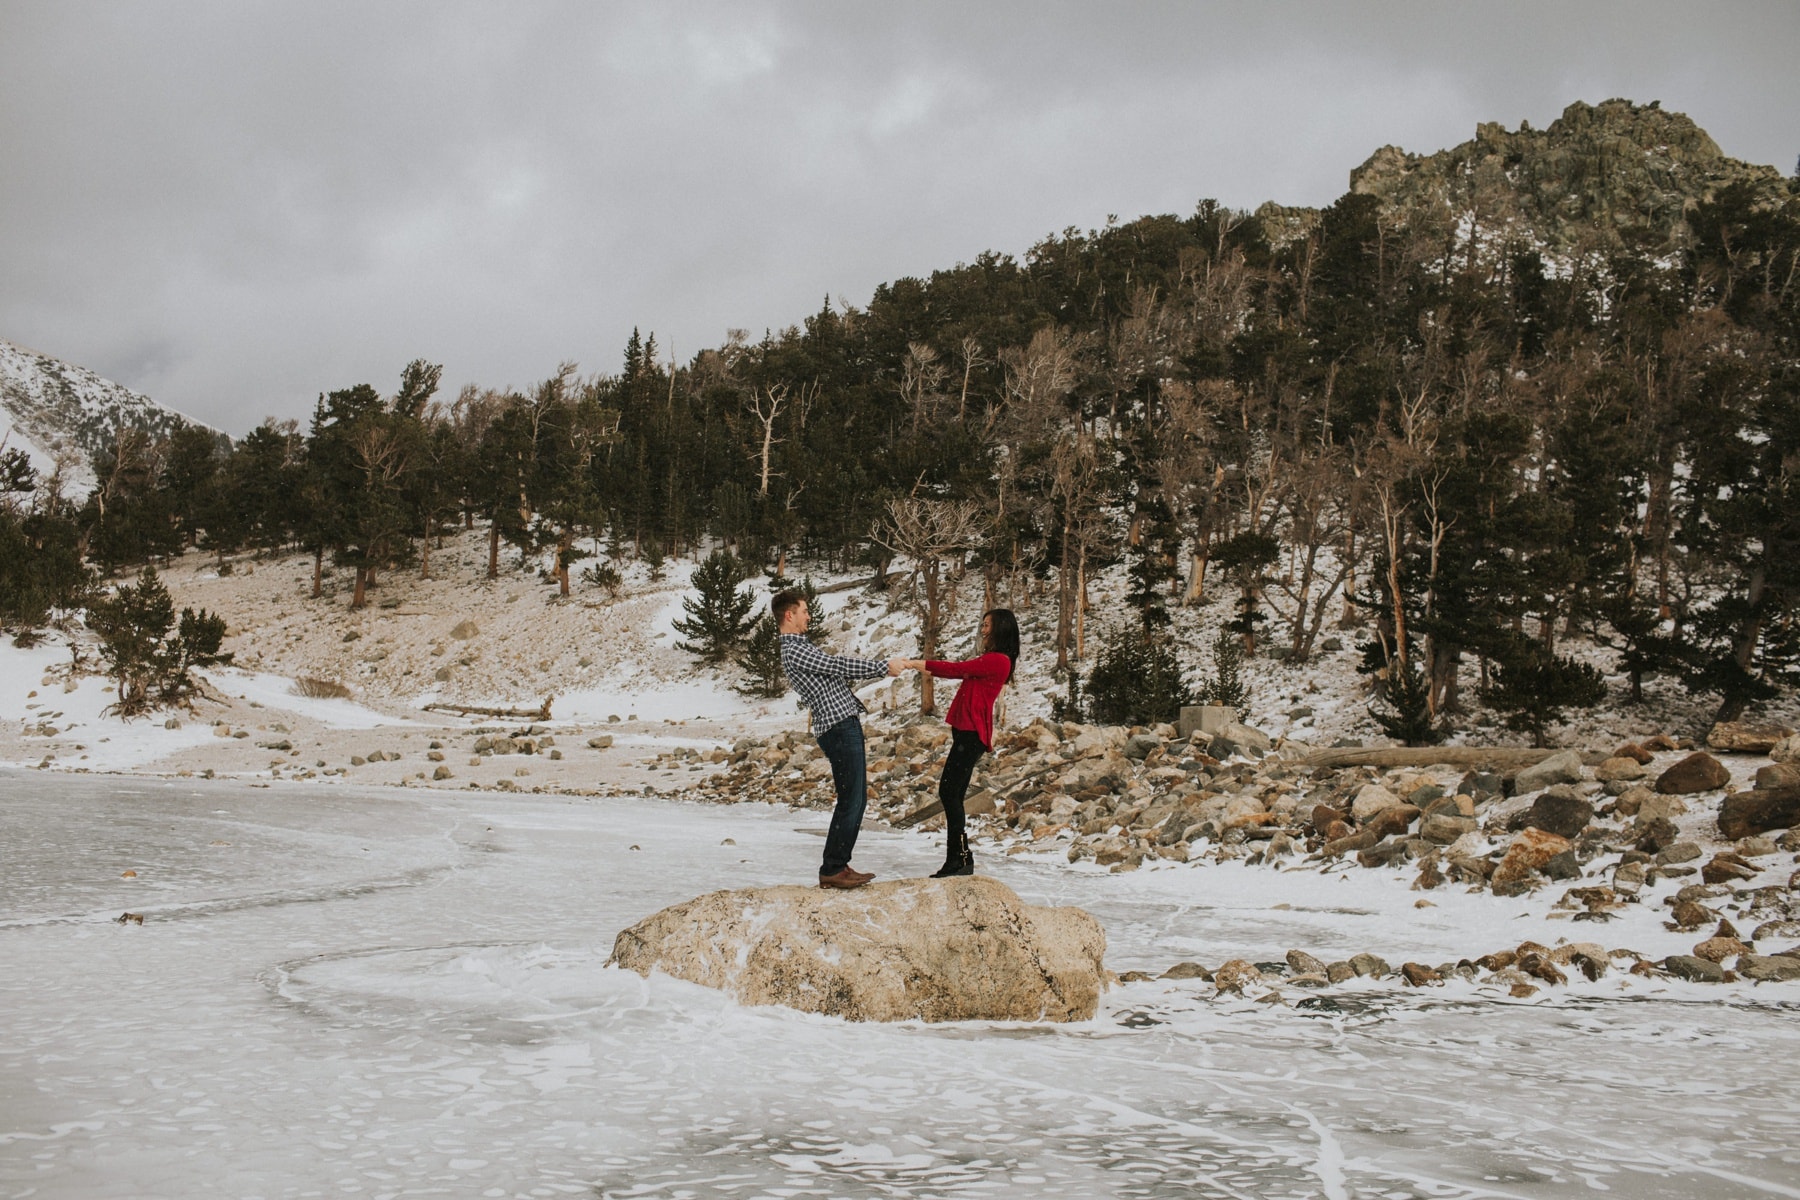 st. mary's glacier, winter engagement session, mountain winter engagement session, colorado adventure engagement session, windy winter engagement session, winter engagement session